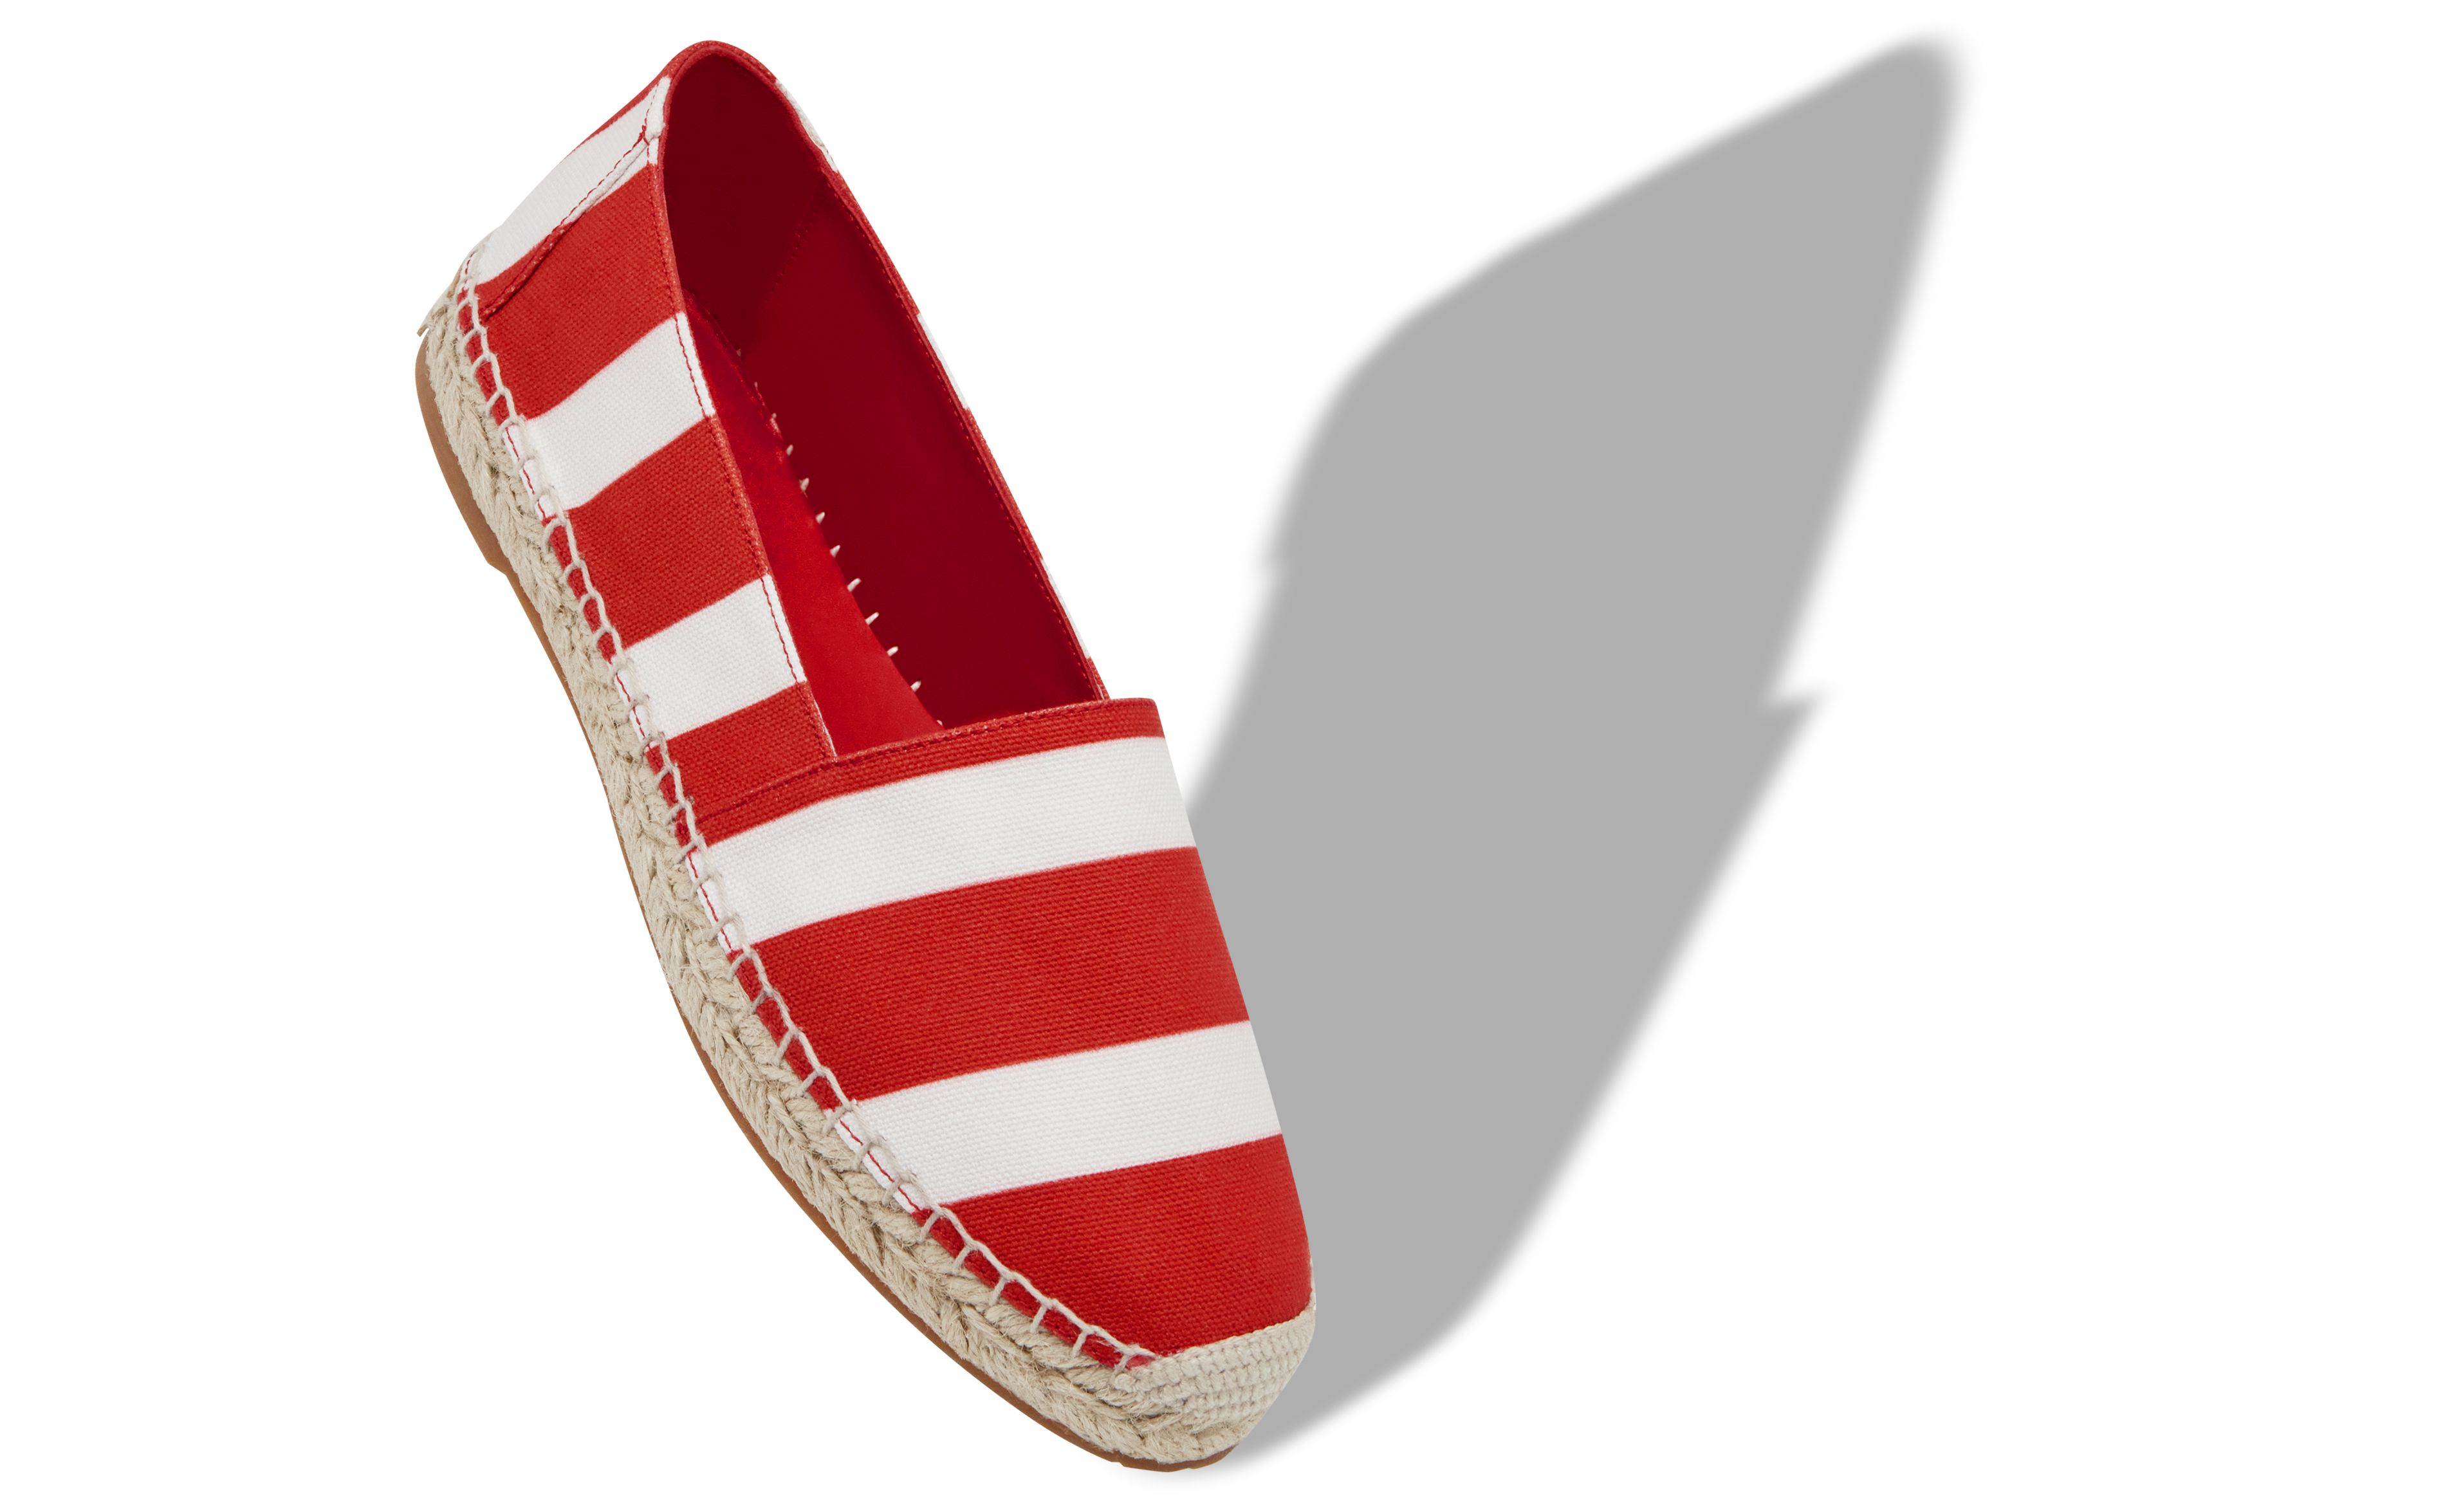 Designer Red and White Striped Cotton Espadrilles  - Image Main